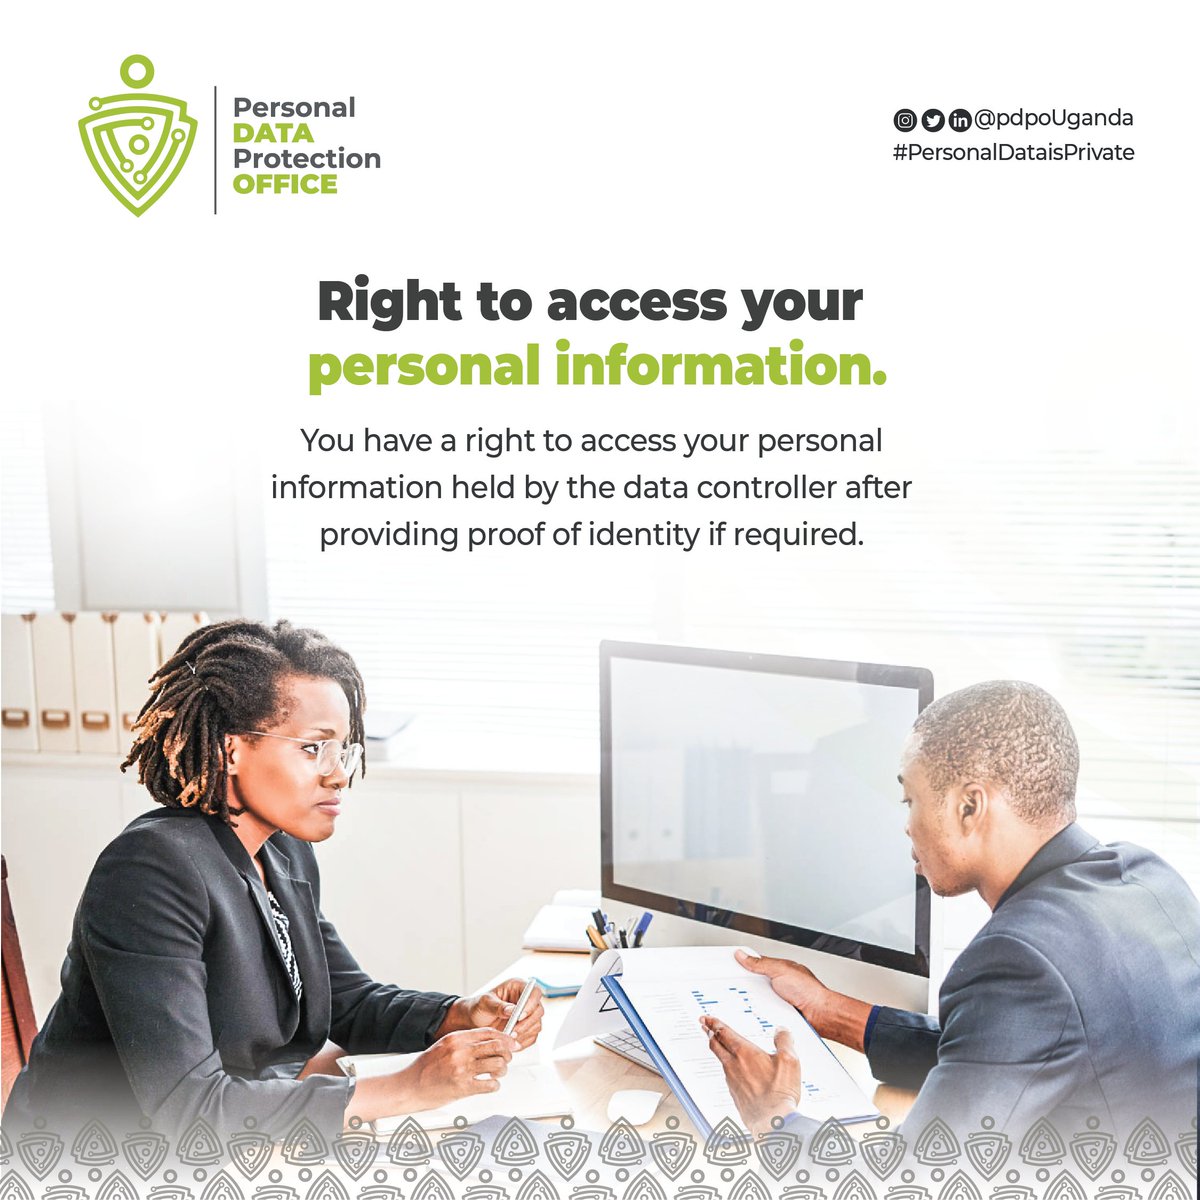 Did you know you have the right to access your personal data held by companies and organizations? This is a key data subject right that empowers you to understand how your data is being used. #DataPrivacyUG #PersonalDataisPrivate